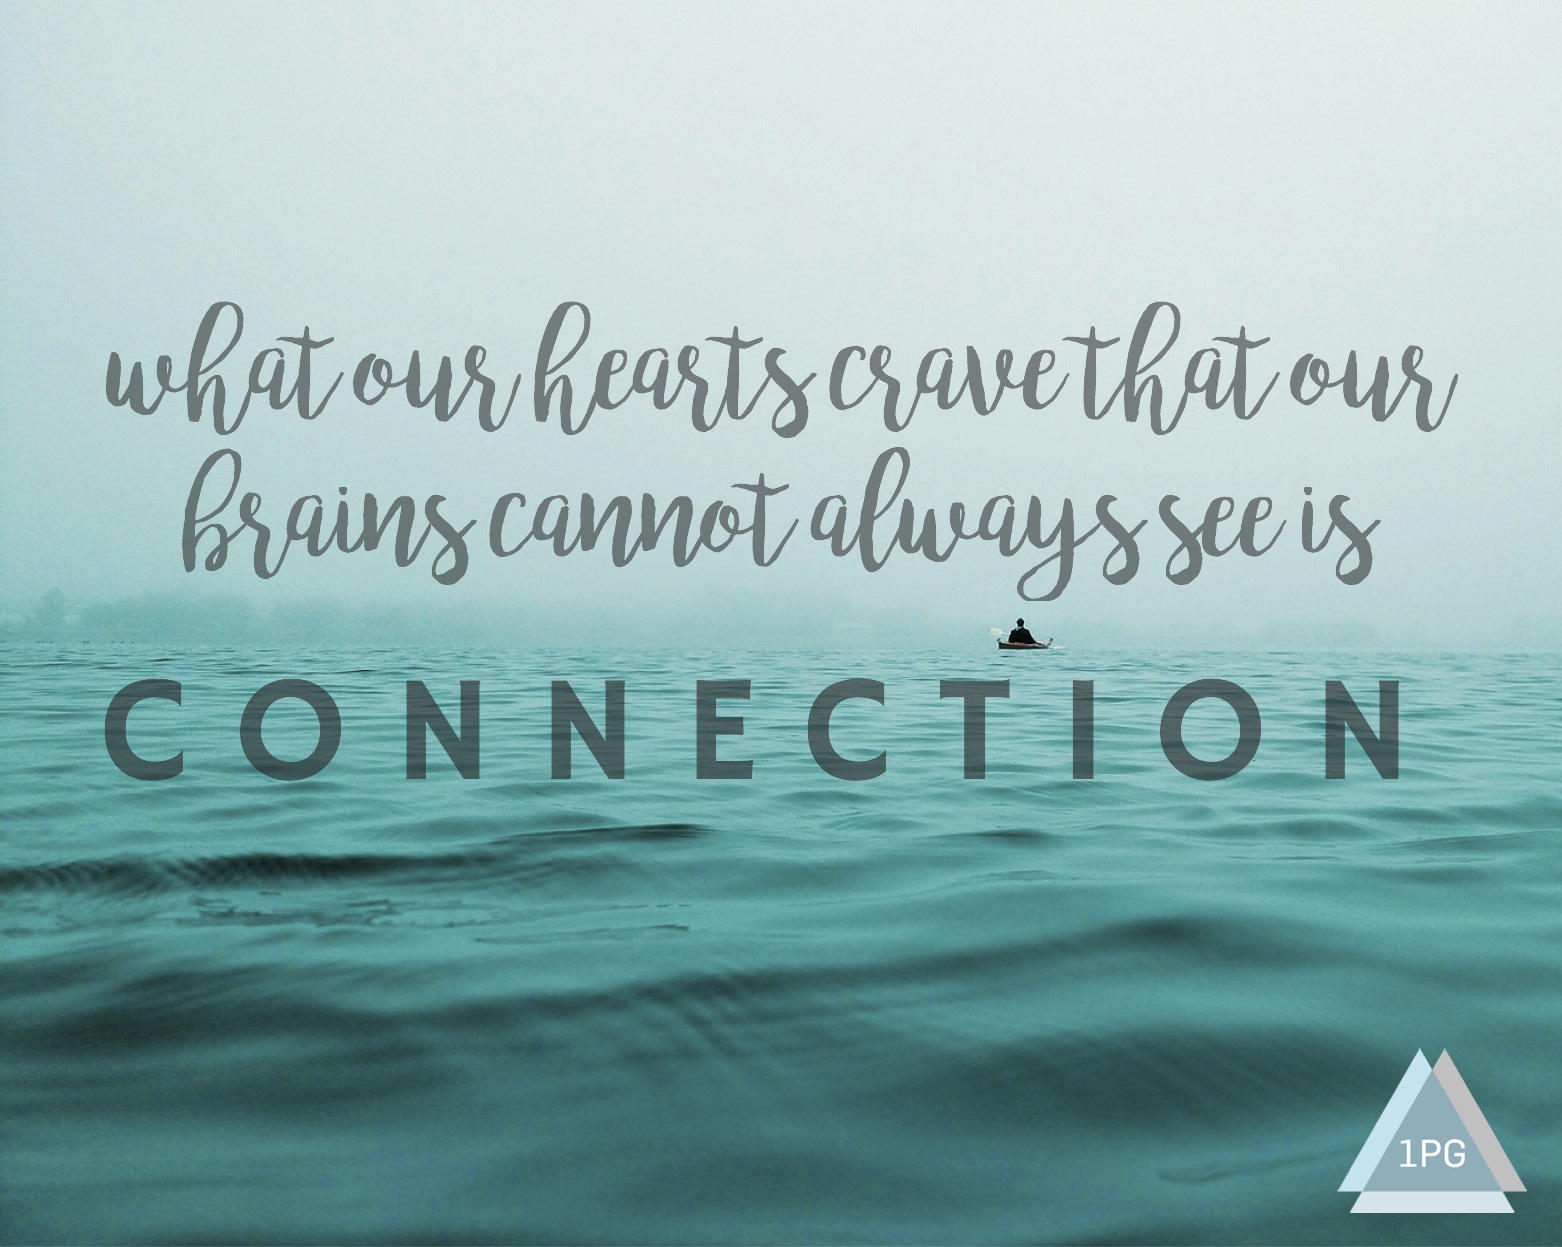 what our hearts crave that our brains cannot always see is connection